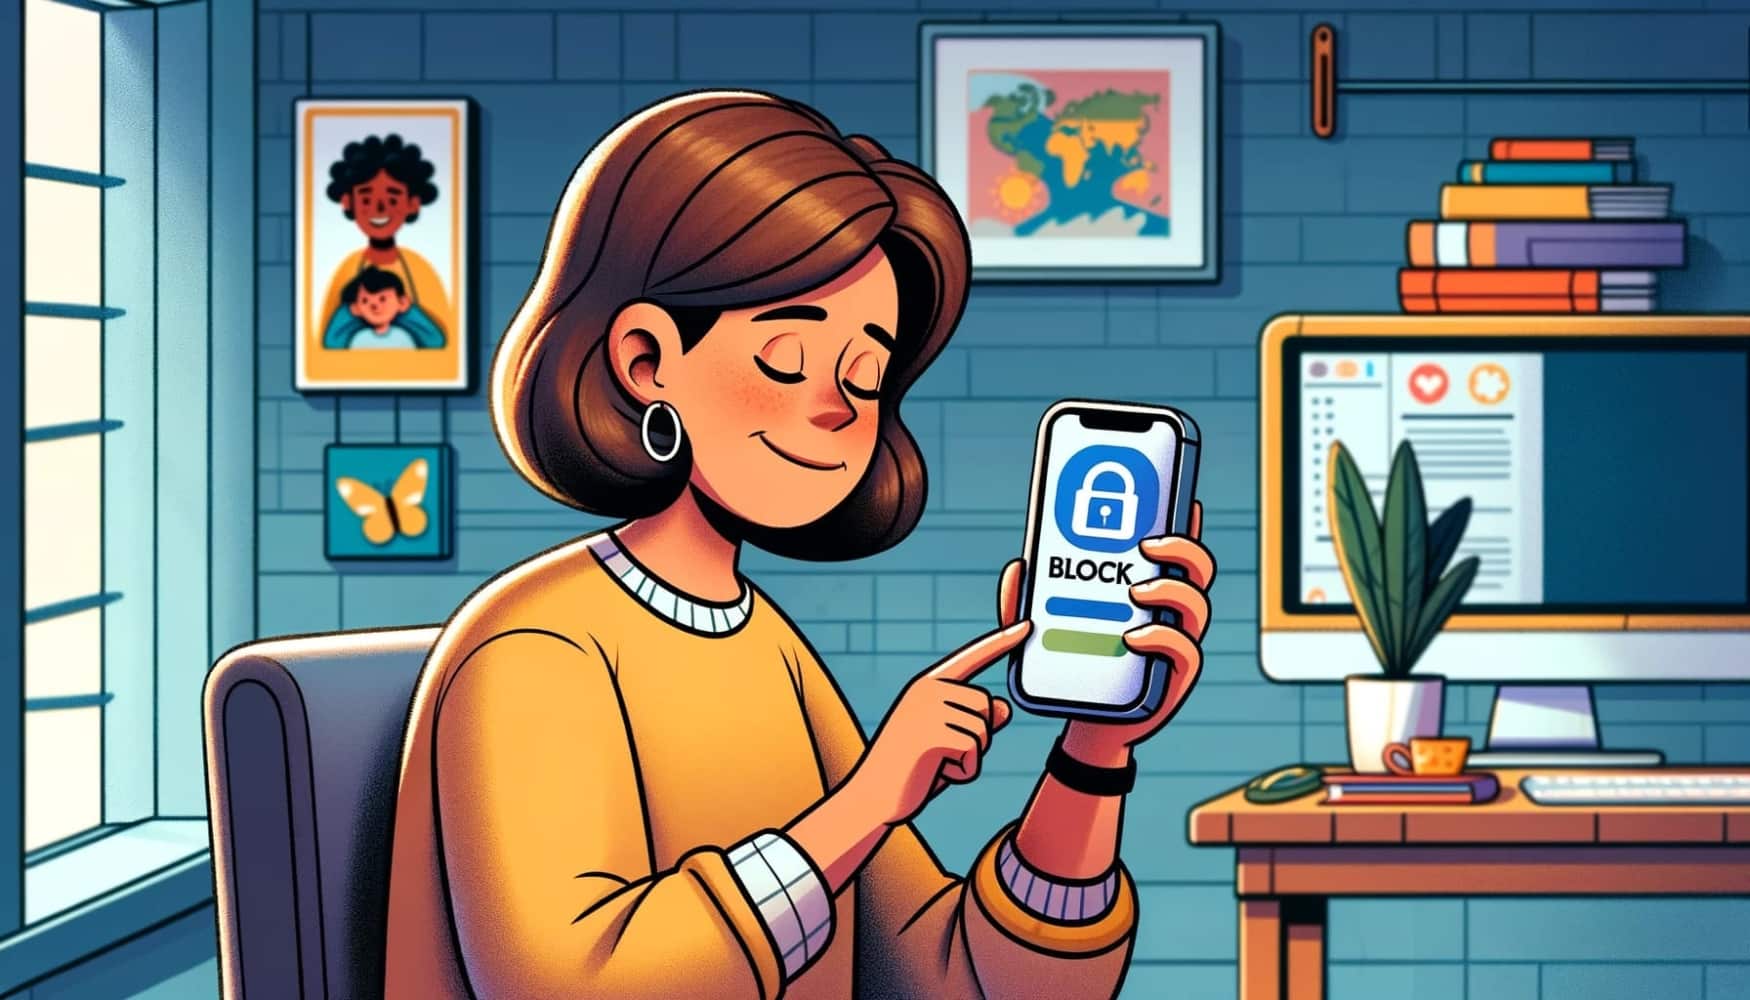 A digital illustration depicting a parent blocking apps on an iPhone. The scene shows a content and relaxed parent in a home office, using an iPhone with a normal hand posture. The iPhone screen is visible, showing a user-friendly interface with clear options to block apps. The background includes a bookshelf with parenting books and a world map, suggesting a family-oriented space. The overall atmosphere is calm and focused, mirroring responsible digital parenting